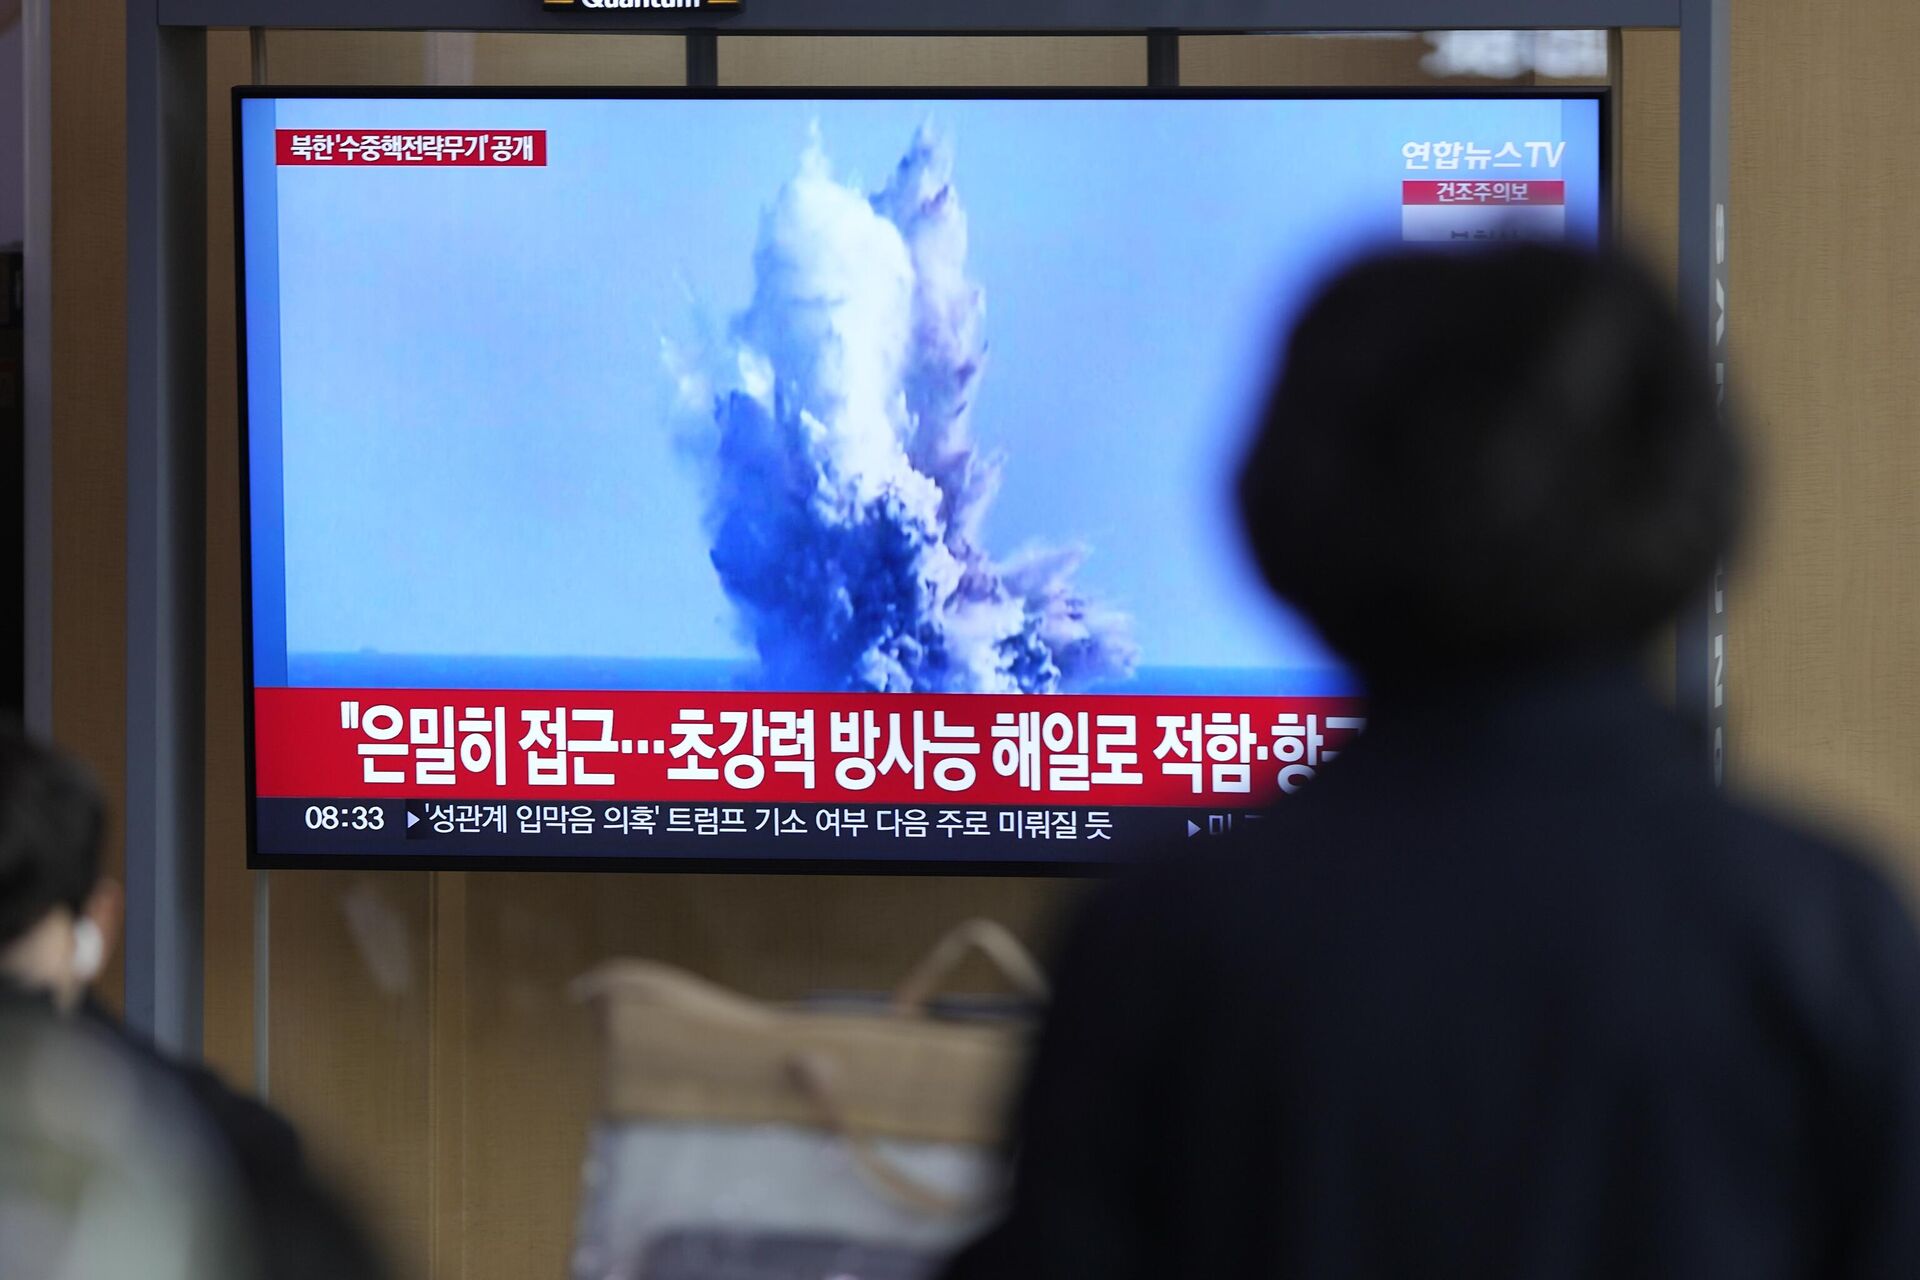 A TV screen shows a recent image released by Pyongyang’s official Korean Central News Agency during a news program at the Seoul Railway Station in Seoul, South Korea, Friday, March 24, 2023. North Korea said Friday its cruise missile launches this week were part of nuclear attack simulations that also involved a detonation by a purported underwater drone as leader Kim Jong Un vowed to make his rivals plunge into despair. - Sputnik International, 1920, 24.03.2023